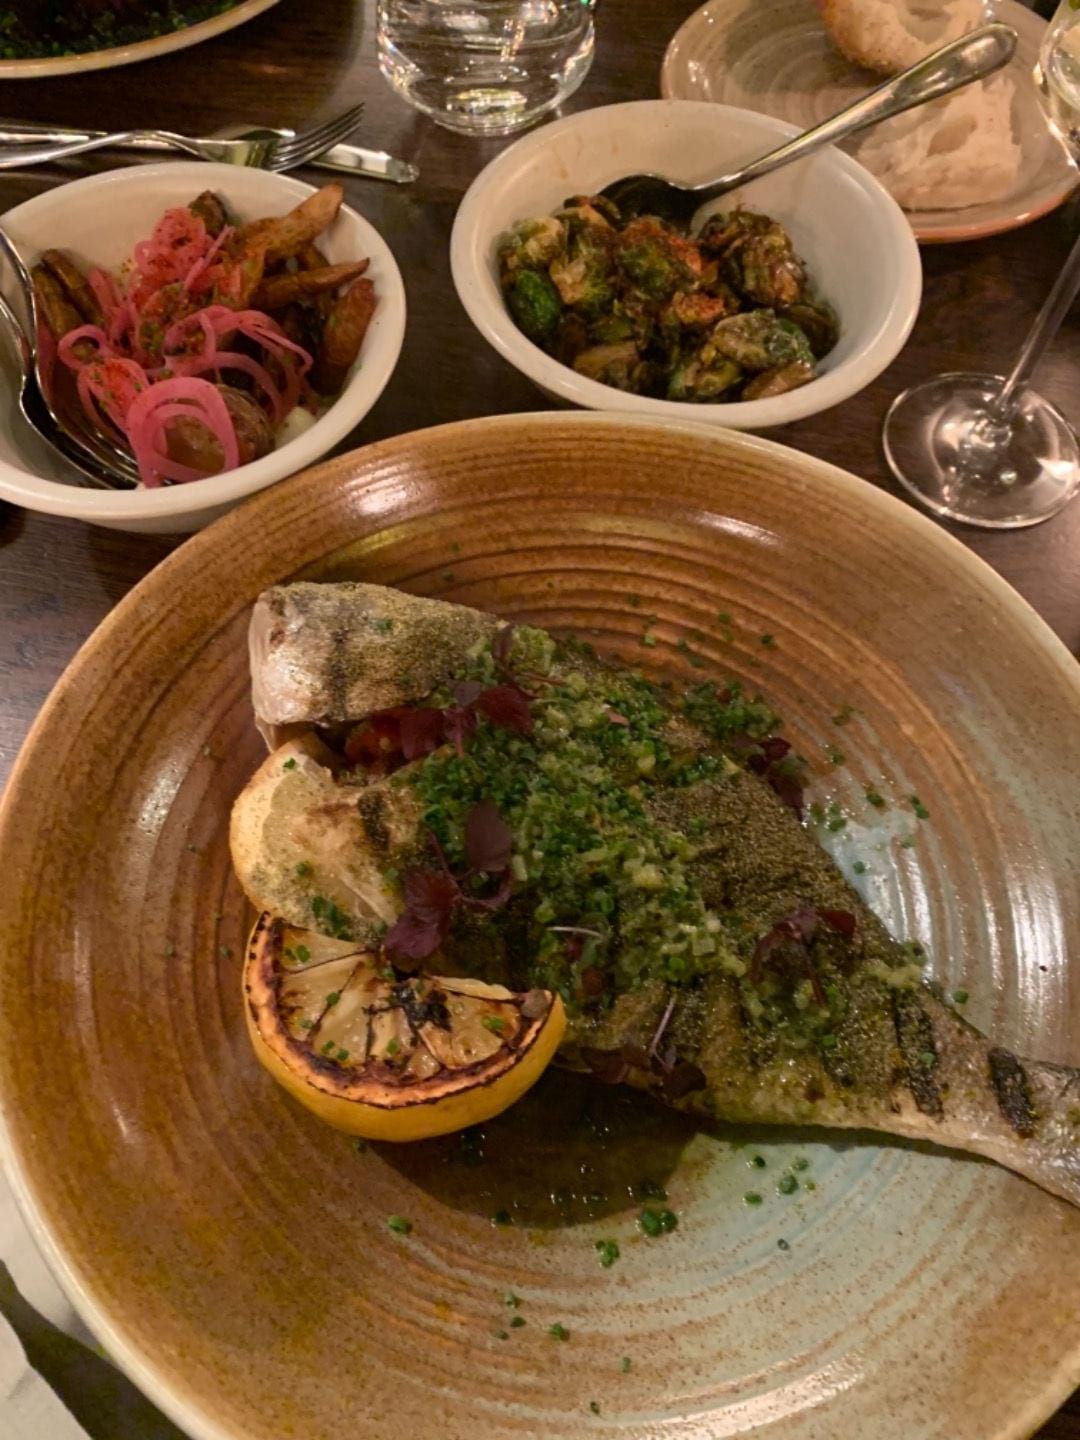 Grillad durade – Photo from Nosh and Chow by Malin L. (04/03/2019)